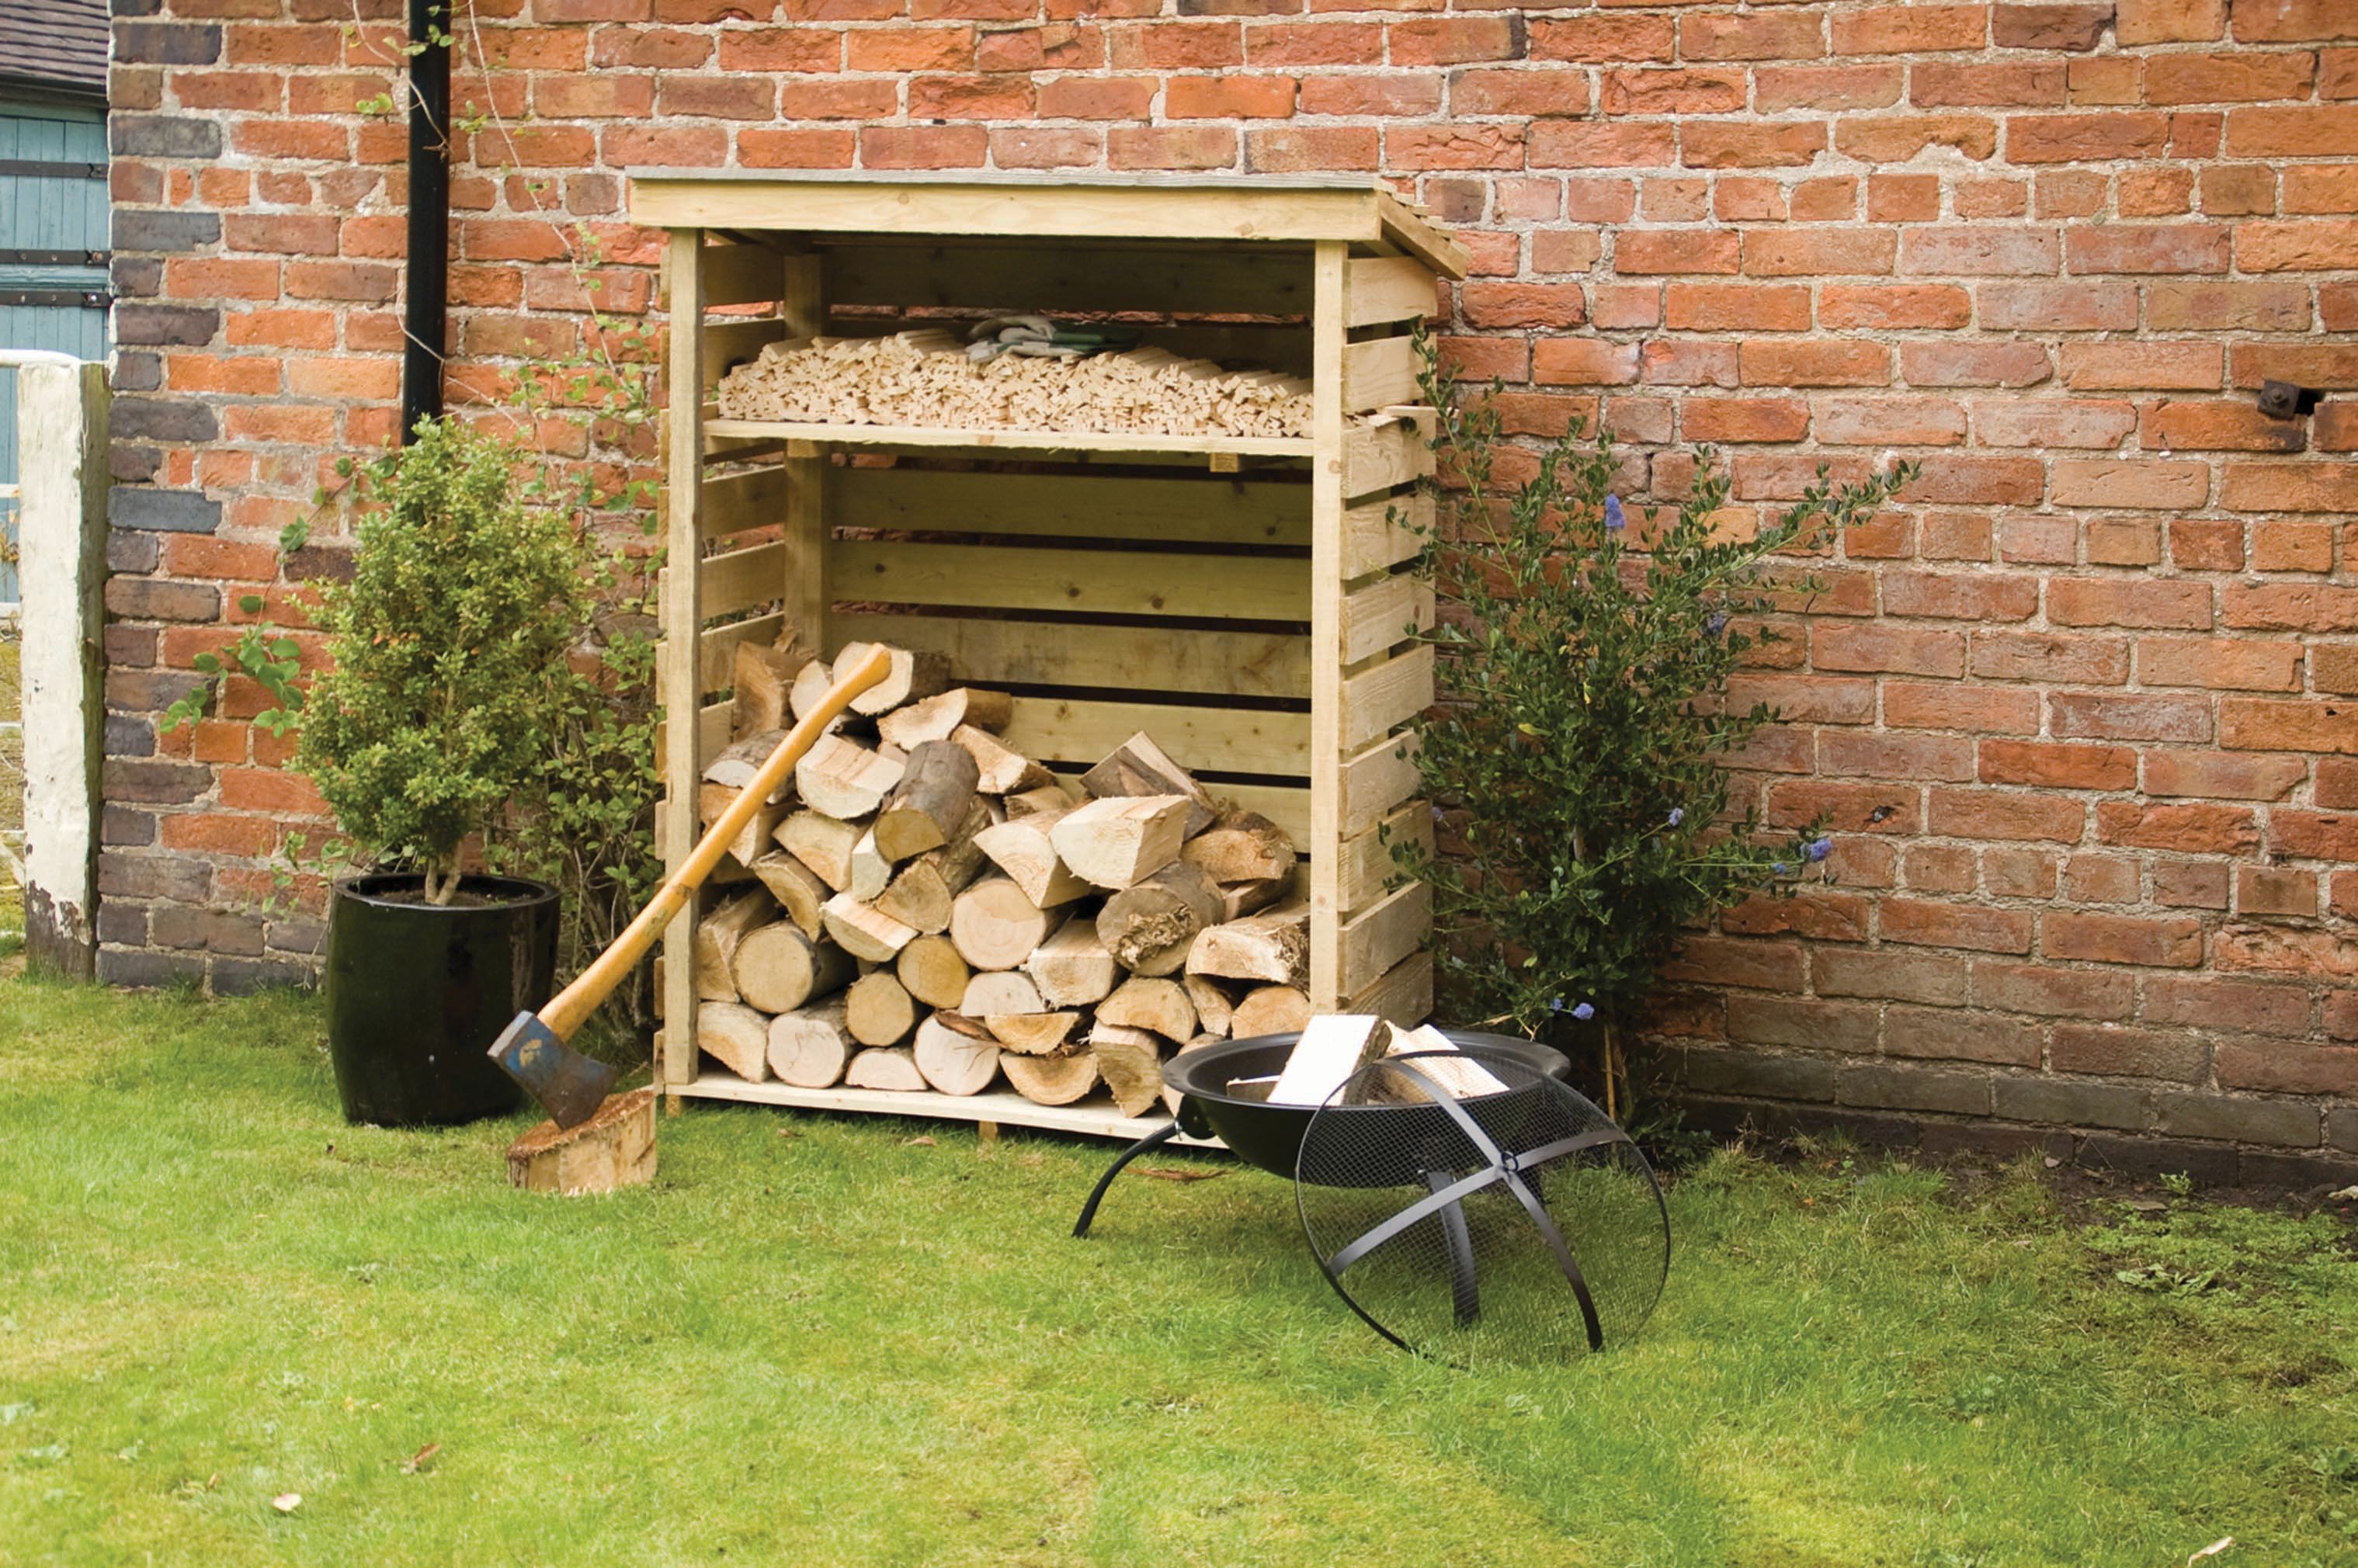 Rowlinson Small Pressure Treated Timber Log Store - 4 x 2ft